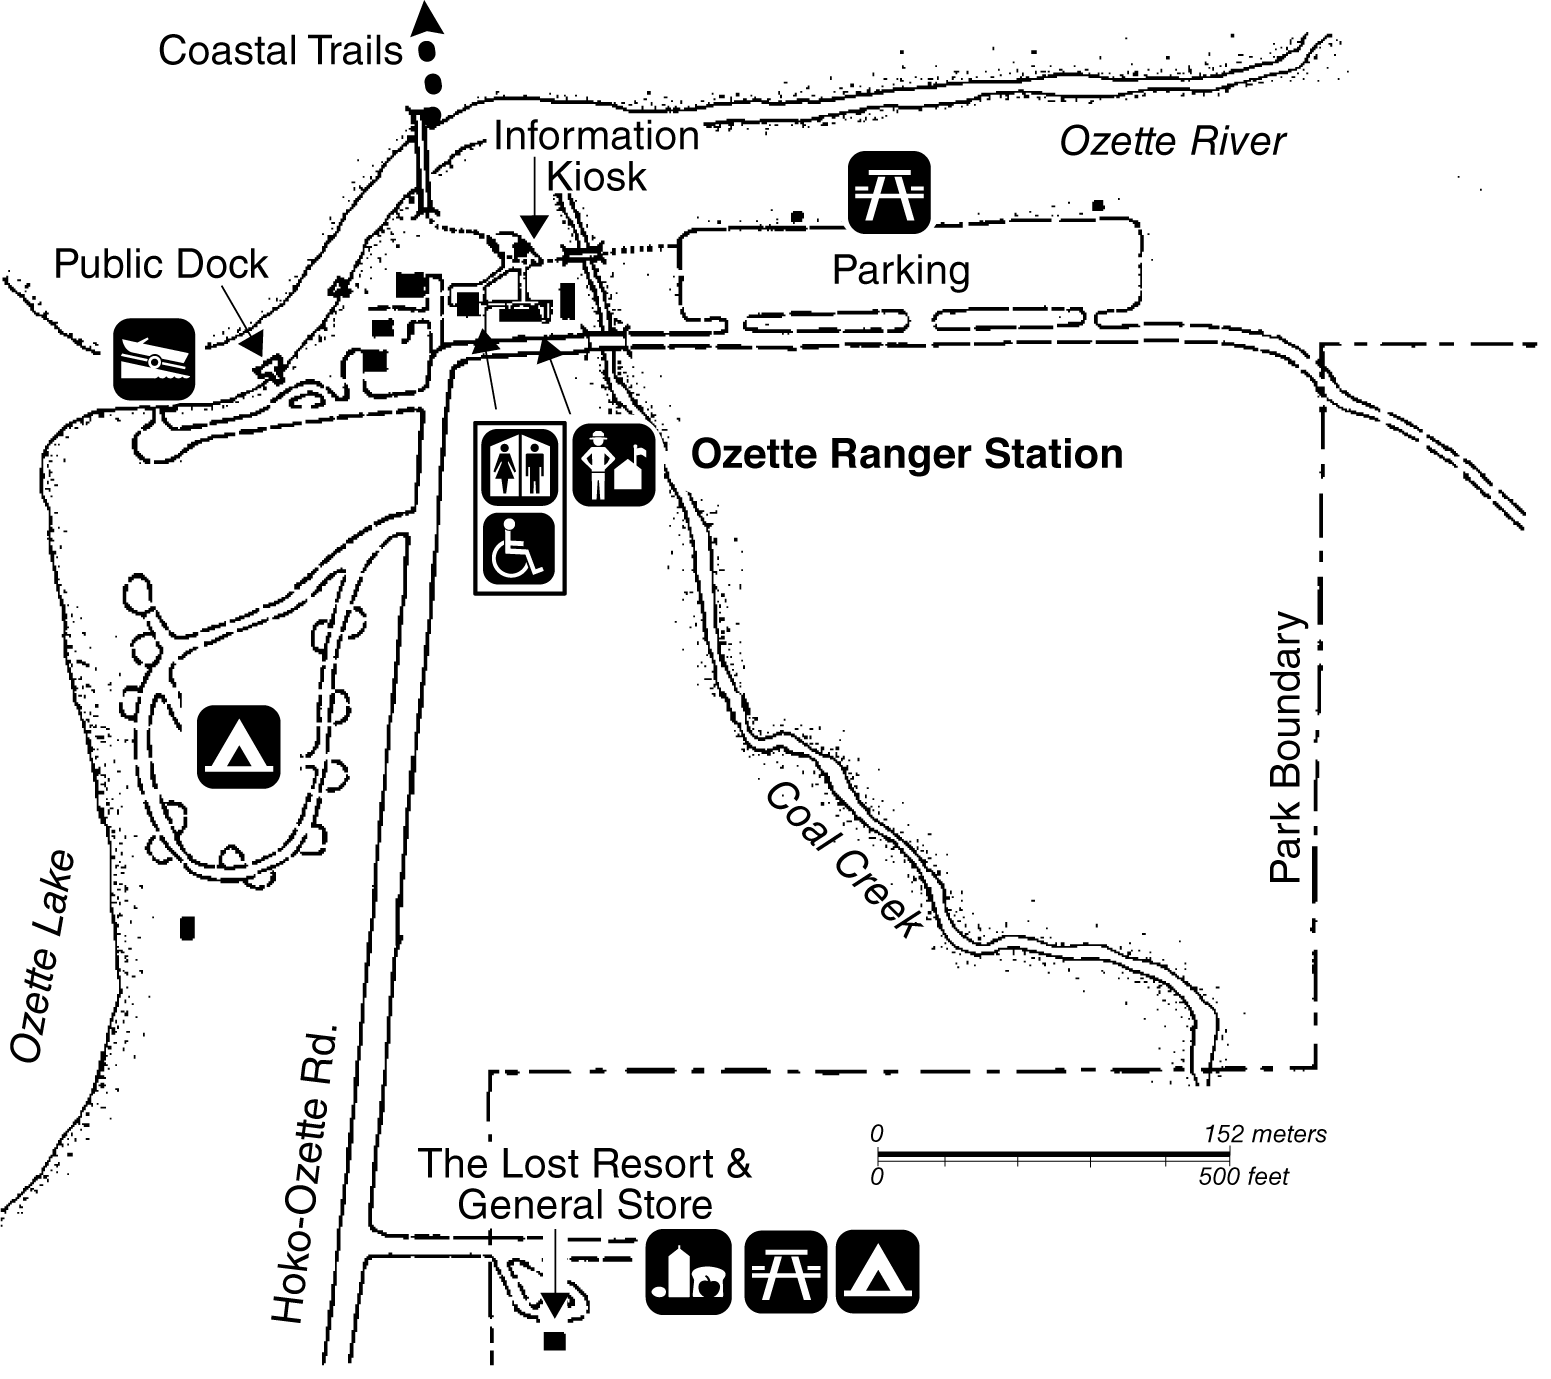 A map of the area around the Ozette Ranger Station, including parking areas, Hoko-Ozette Road, the beginning of coastal trails, and an information kiosk